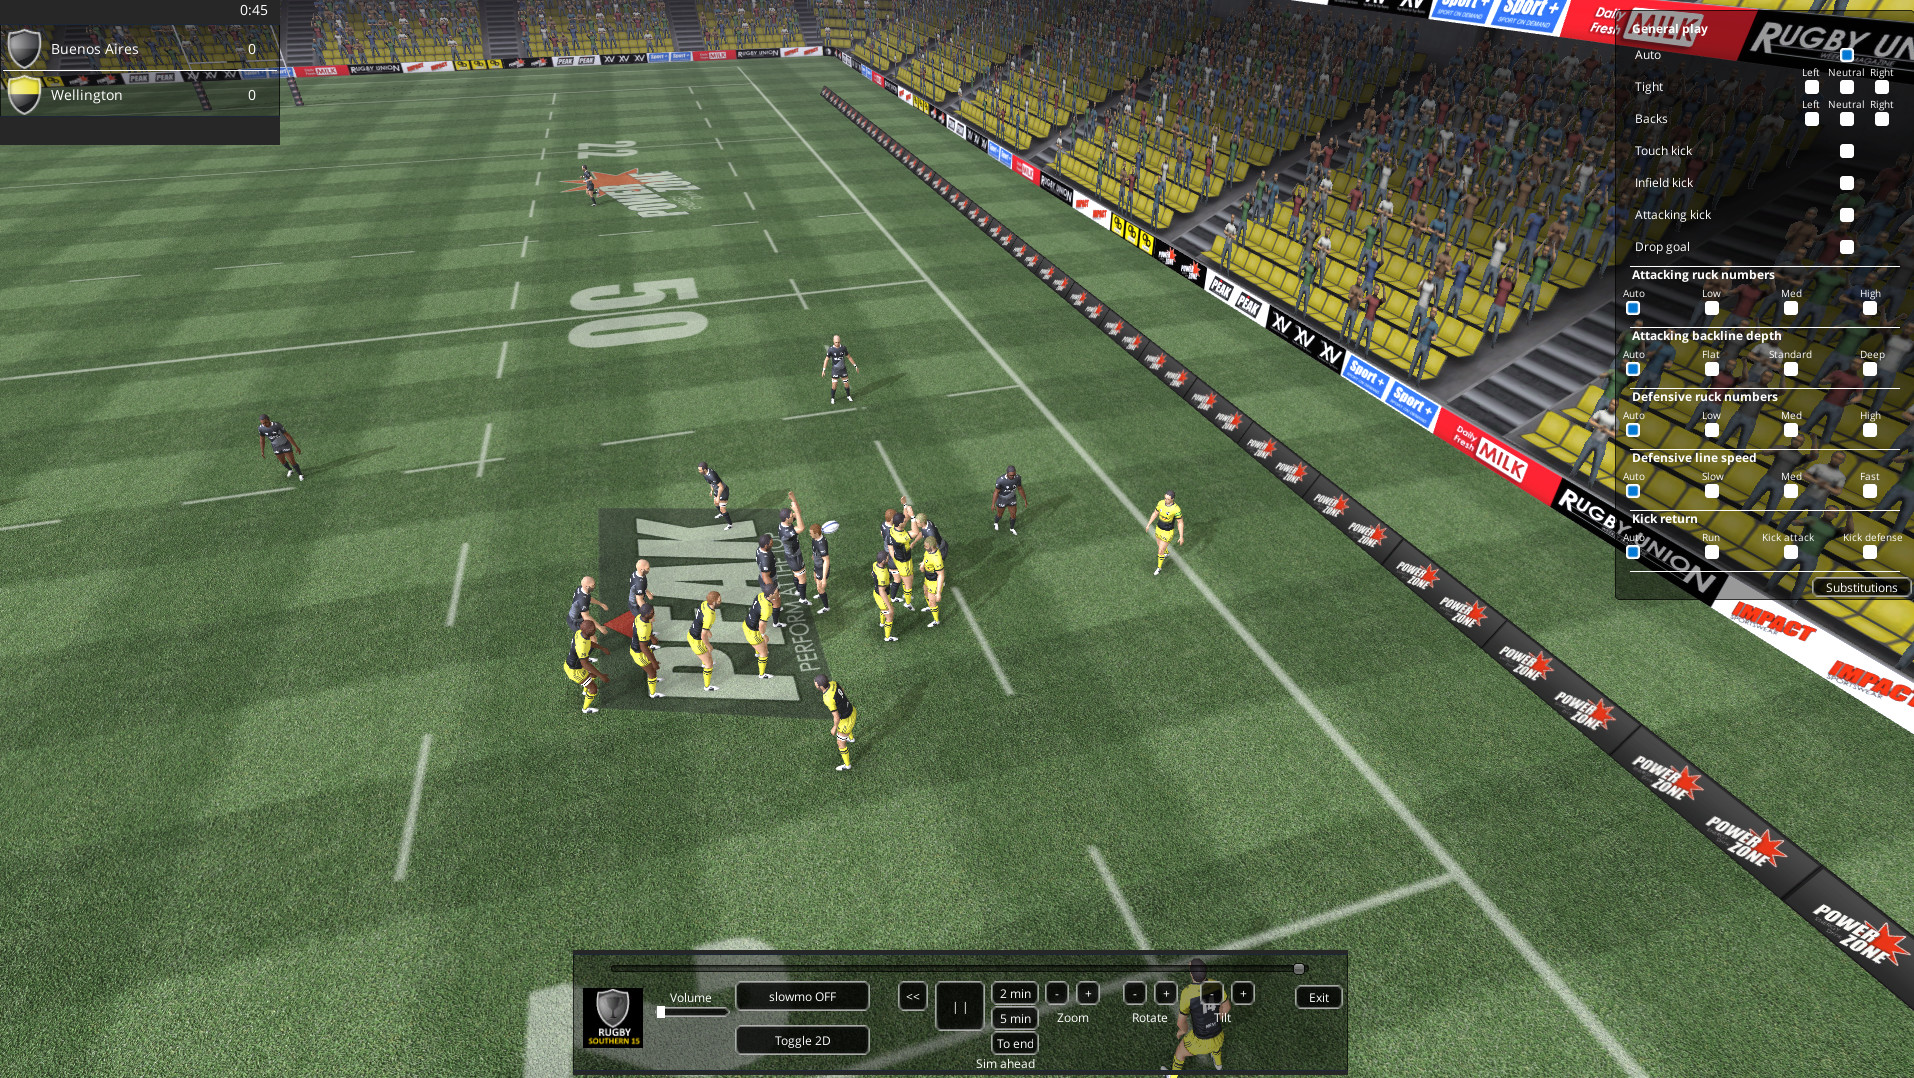 National Rugby Manager - Southern Hemisphere Rugby Pack screenshot